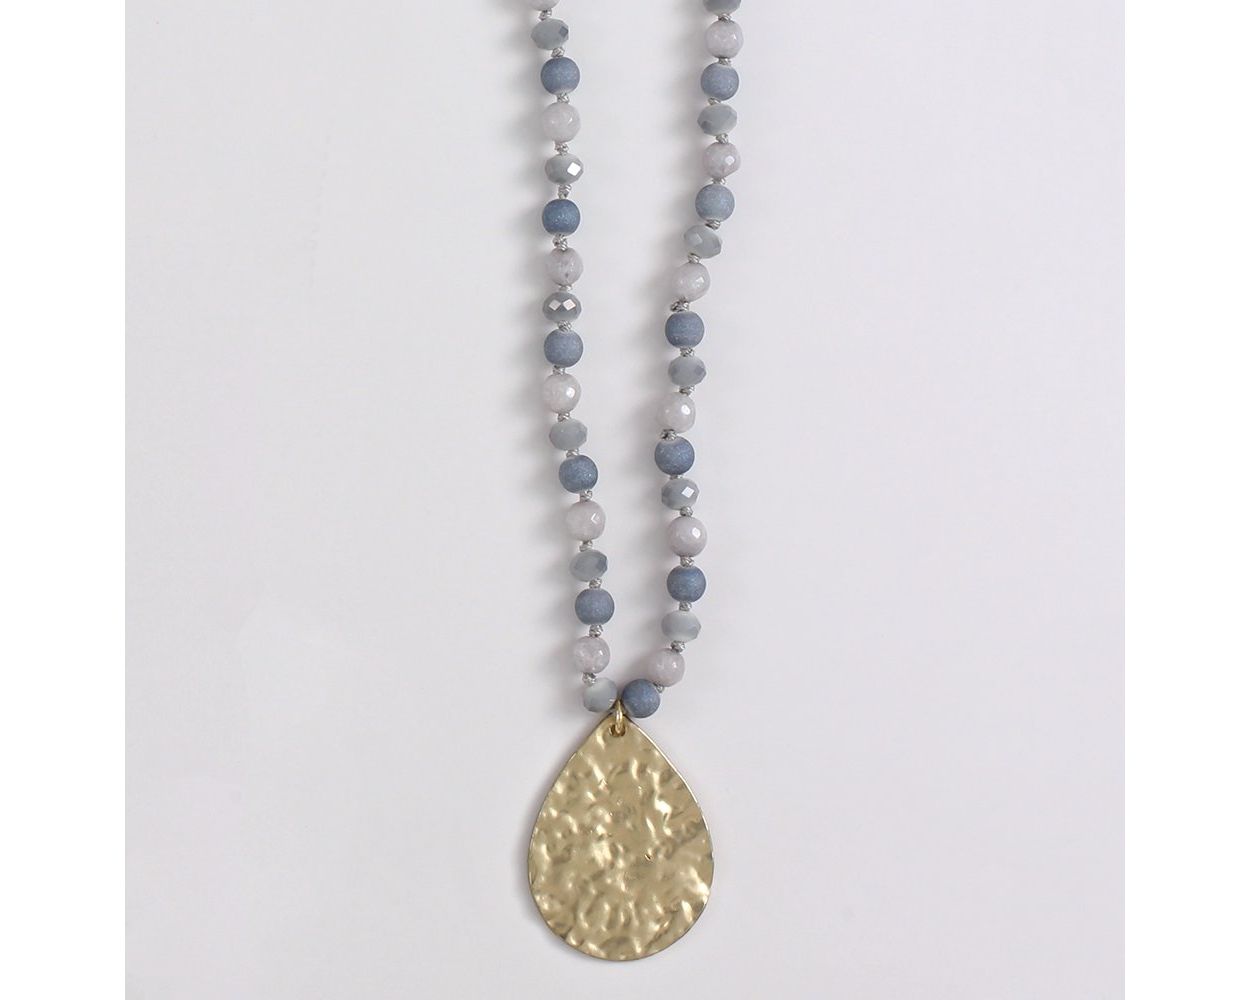 Denim Blue with Hammered Gold Pendant Necklace